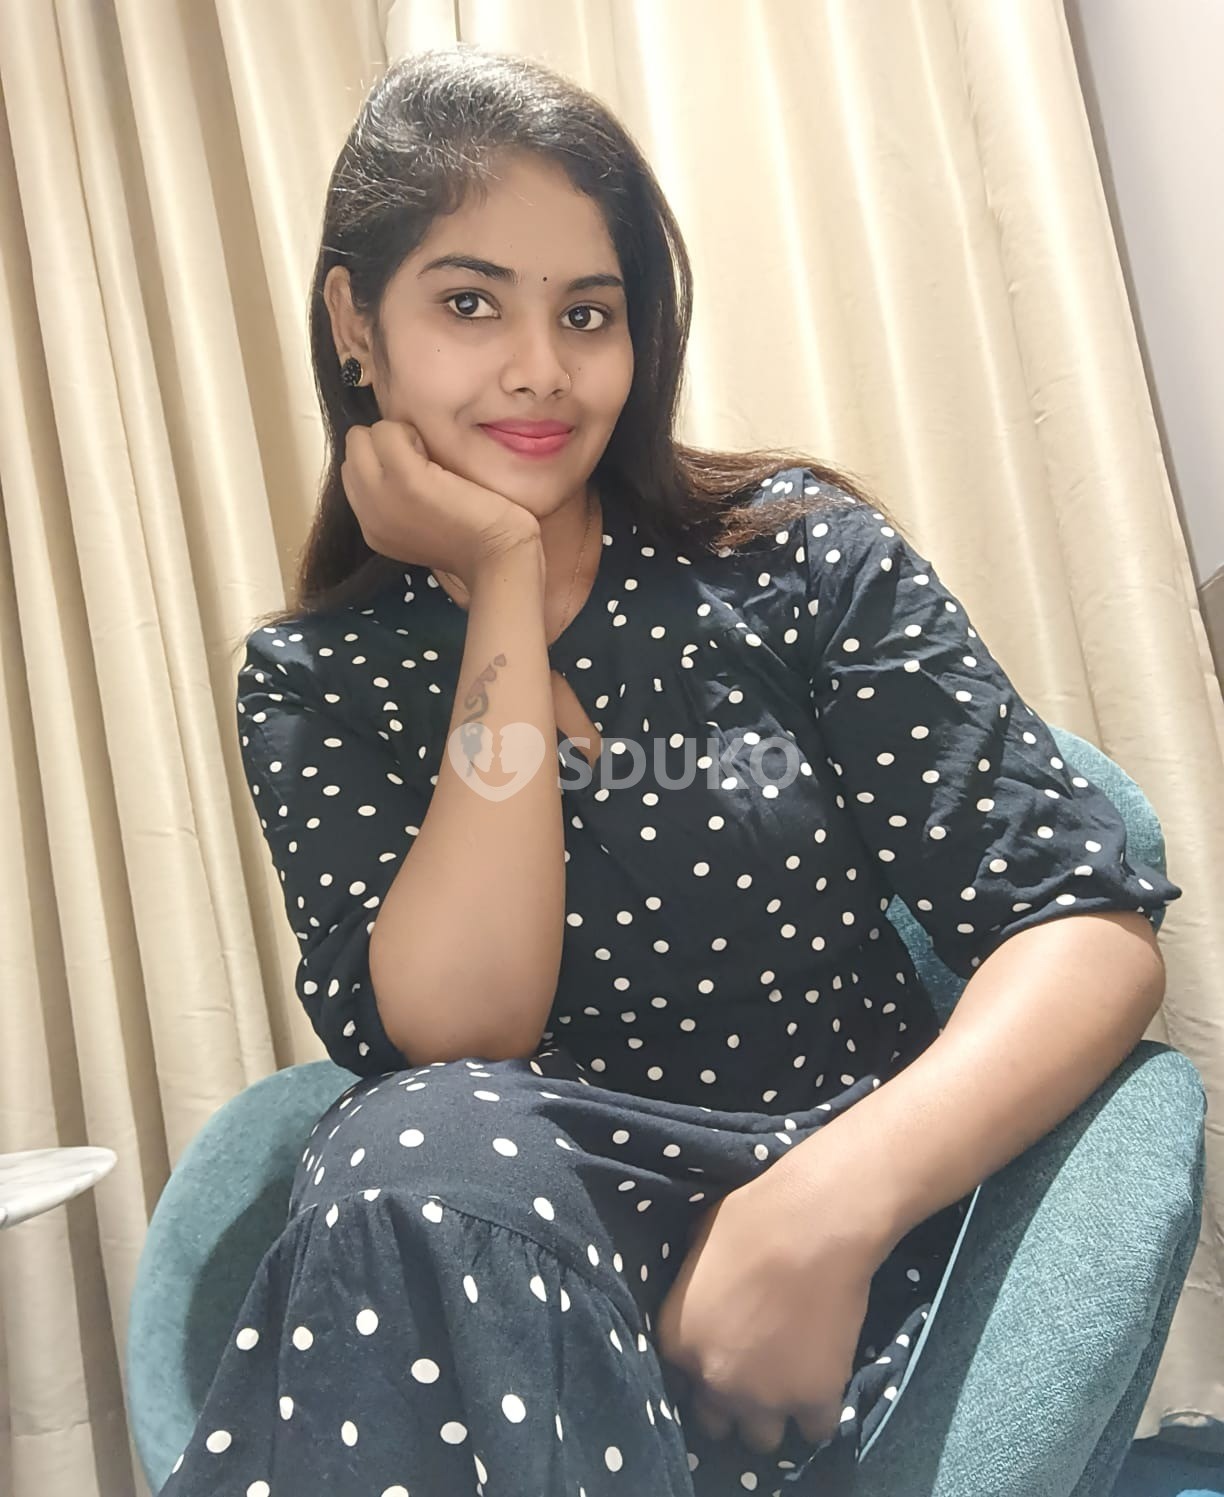 Bathinda the most demanded Vvip genuine High profile college girls available for doorstep incall outcall full safe and s